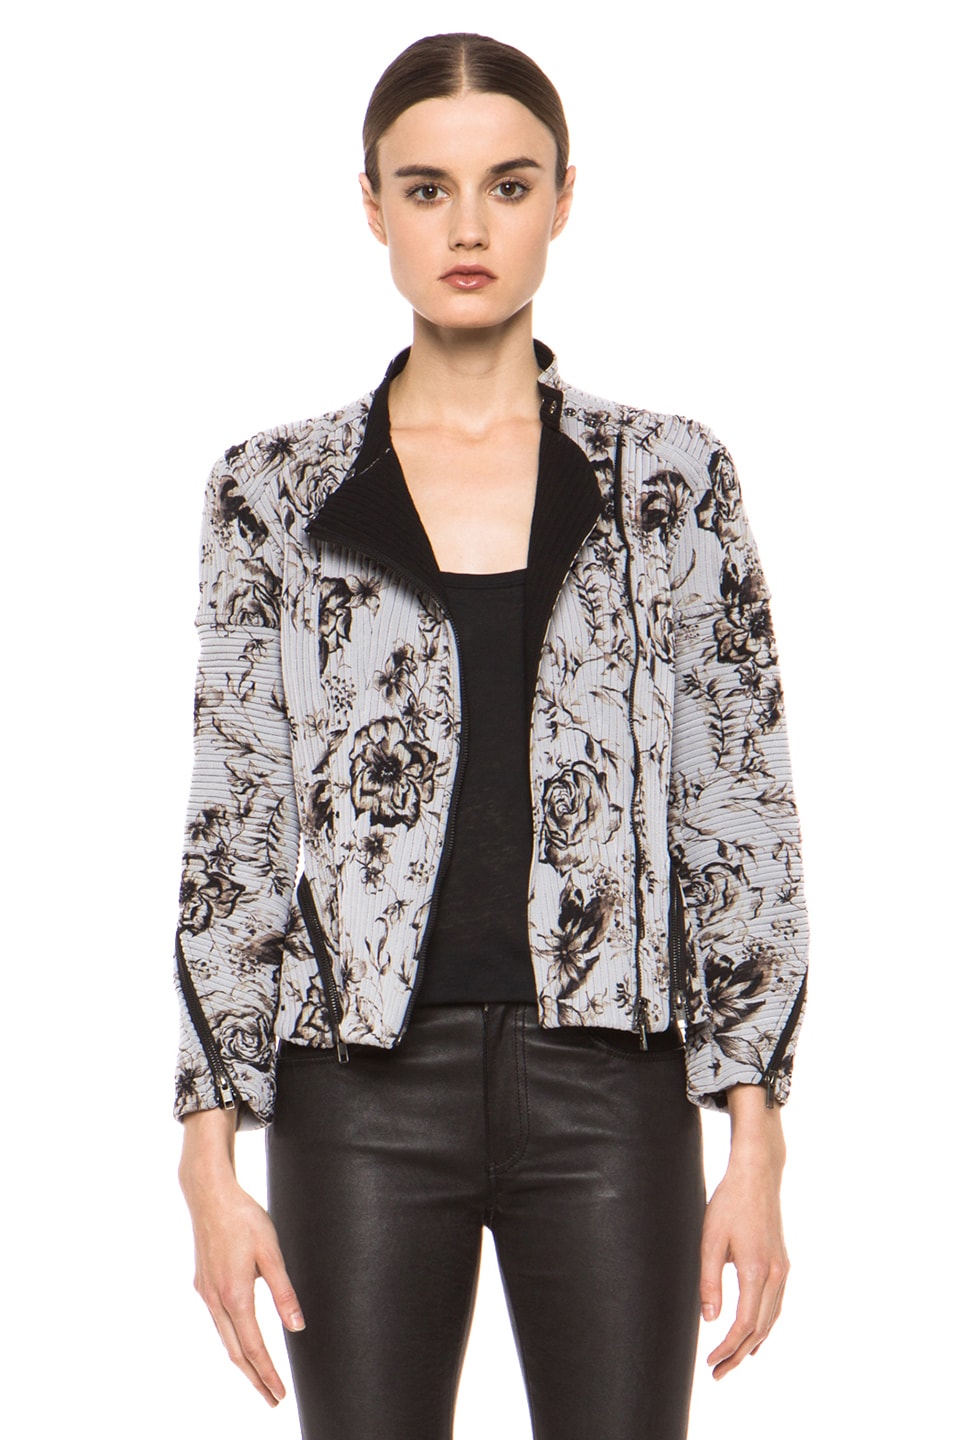 Image 1 of 3.1 phillip lim Floral Relief Print Corded Motorcycle Jacket in Antique White